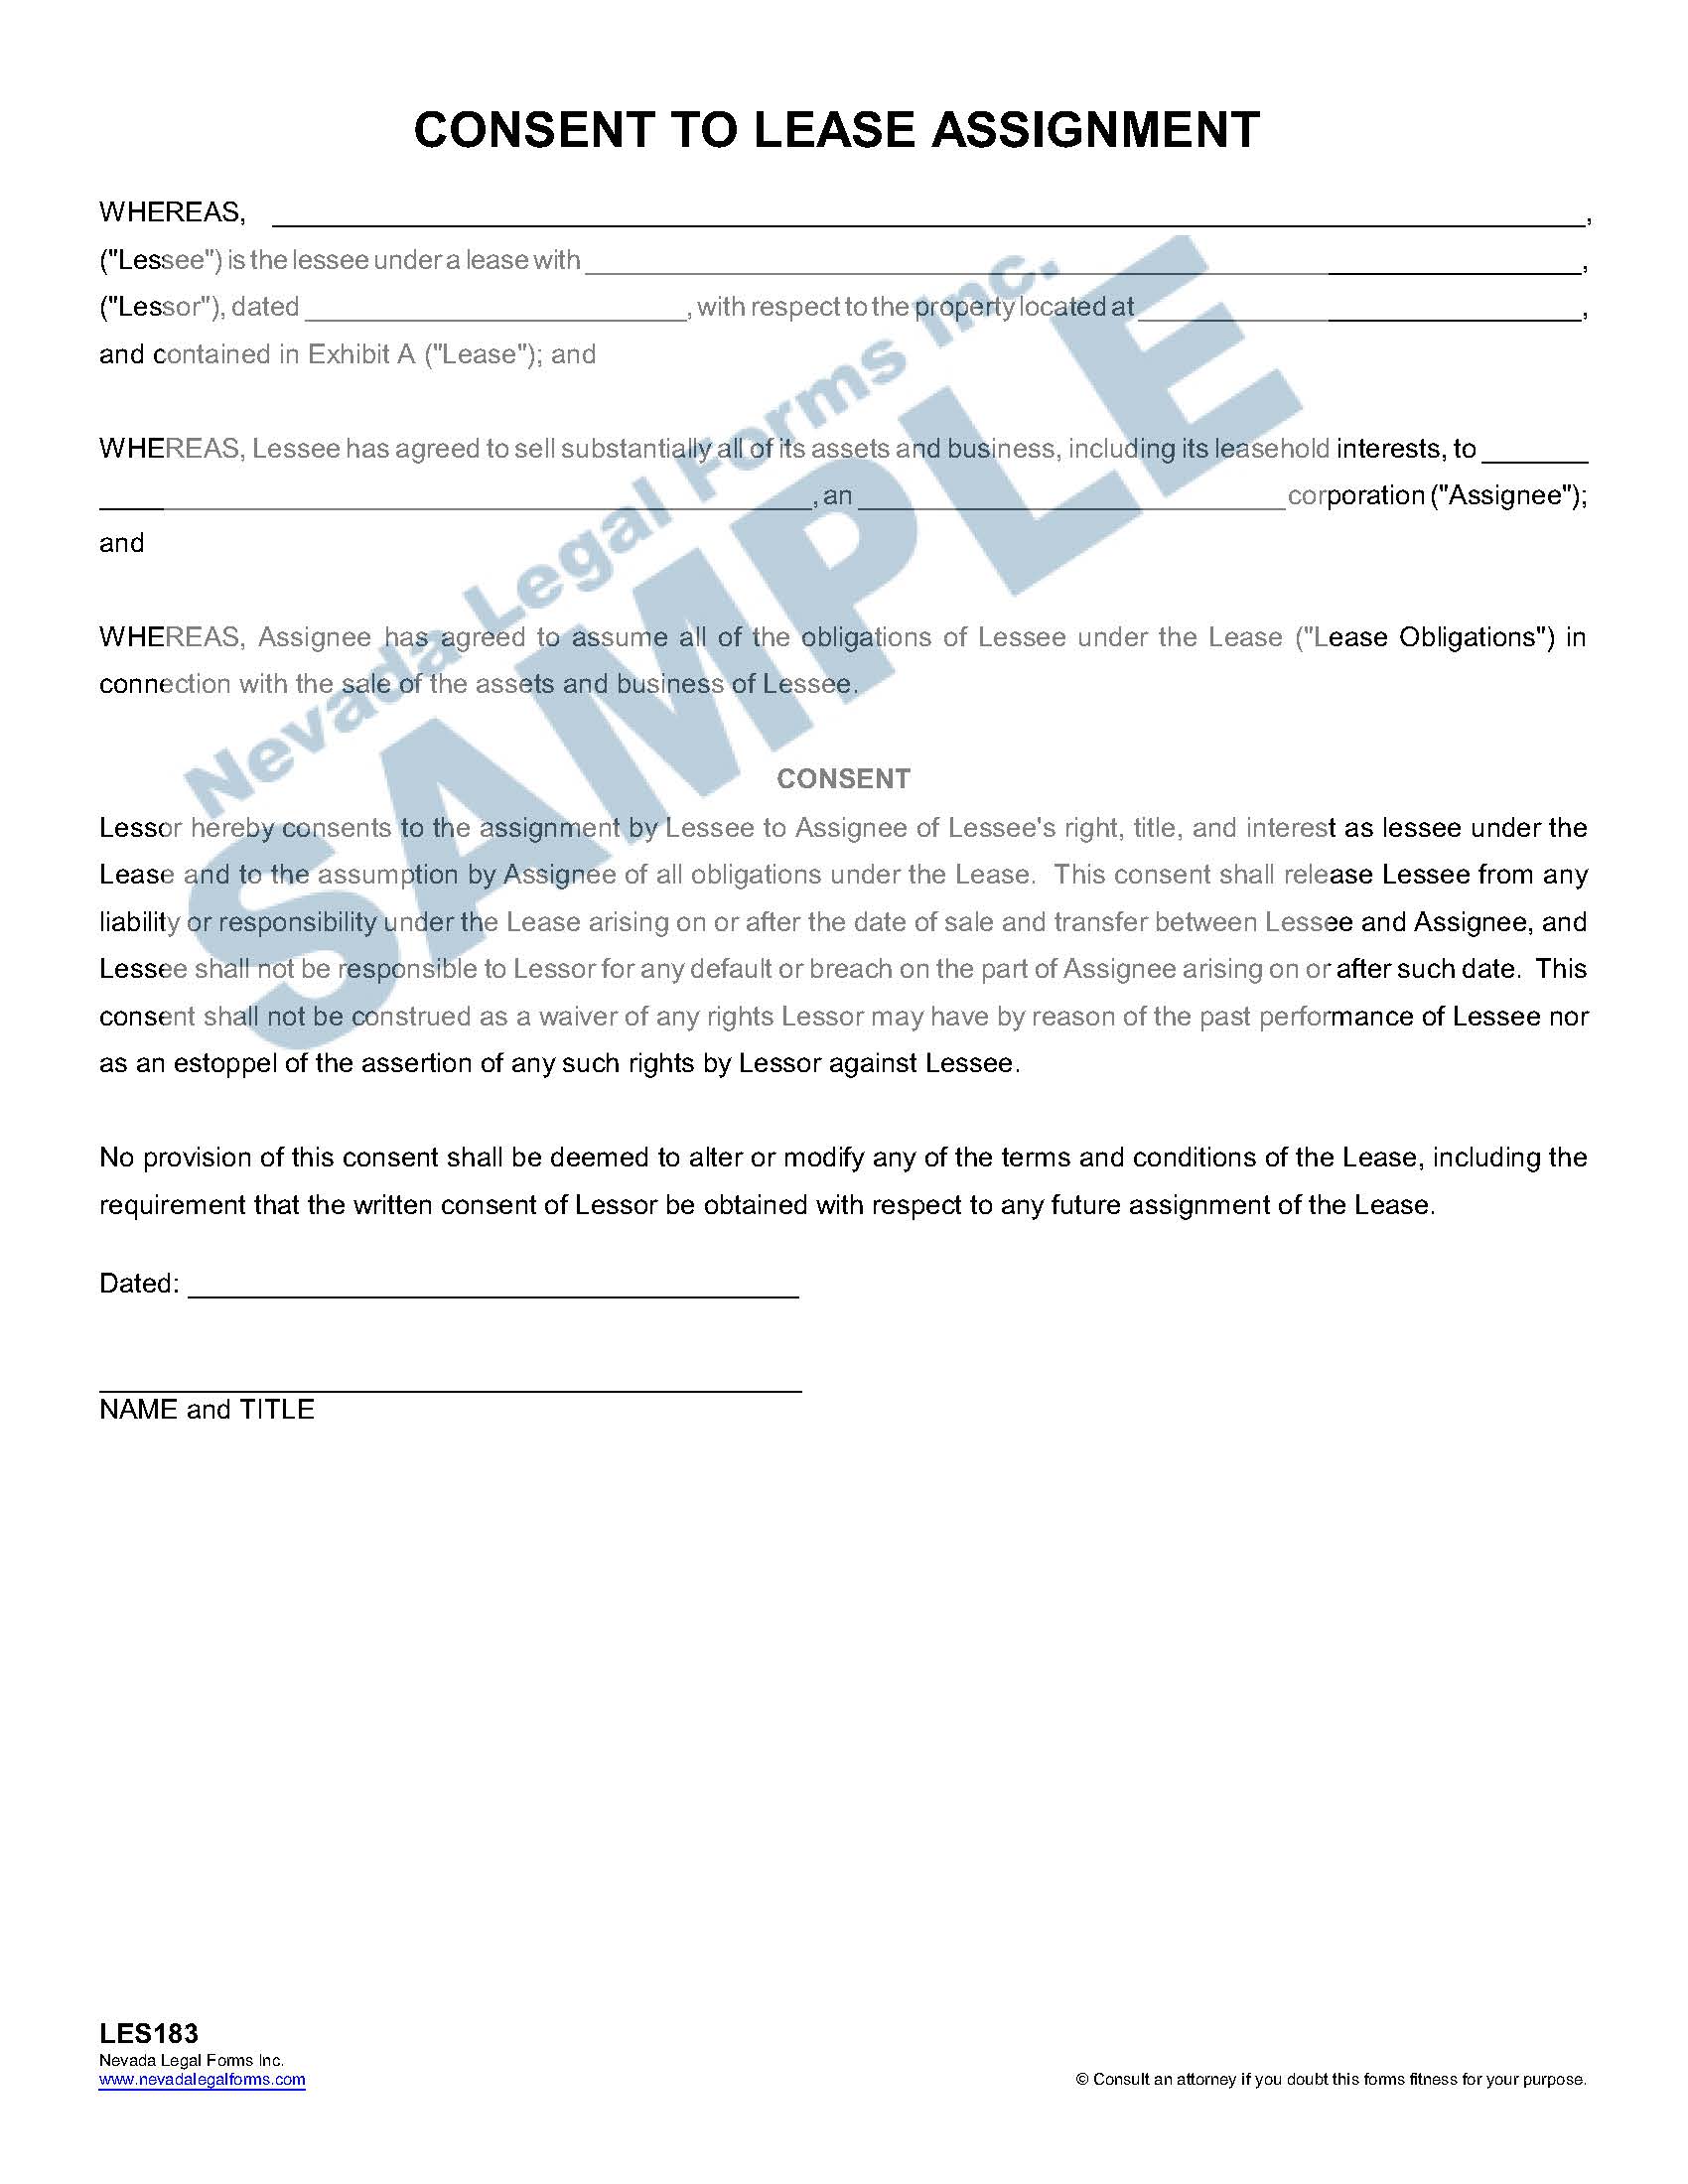 consent to assignment of lease sample